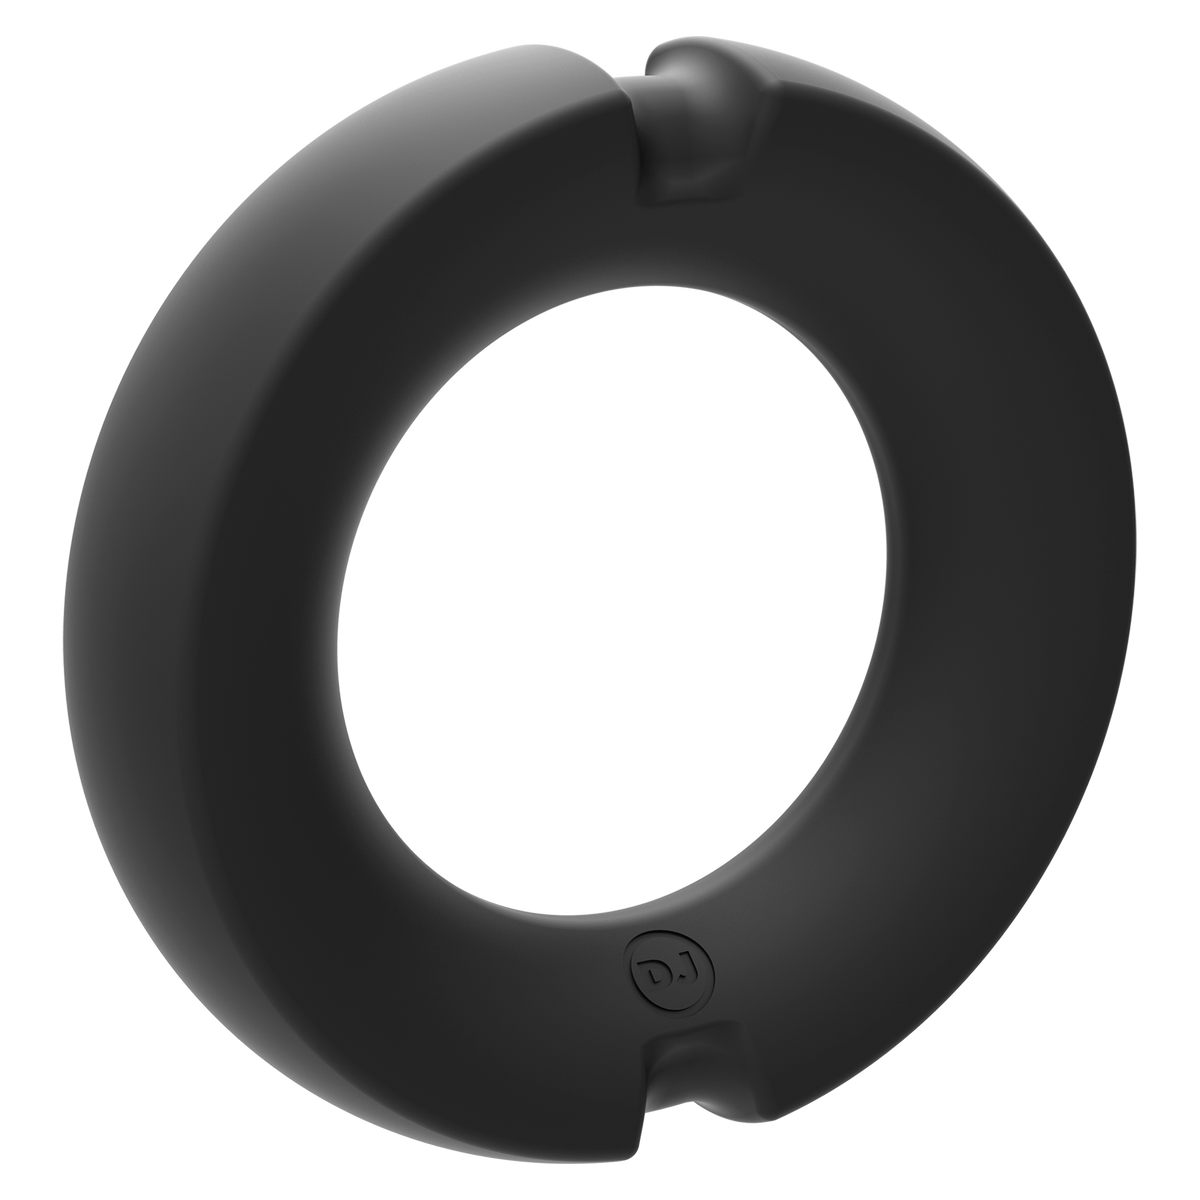 Doc Johnson KINK Silicone-Covered Metal Cock Ring - 45mm